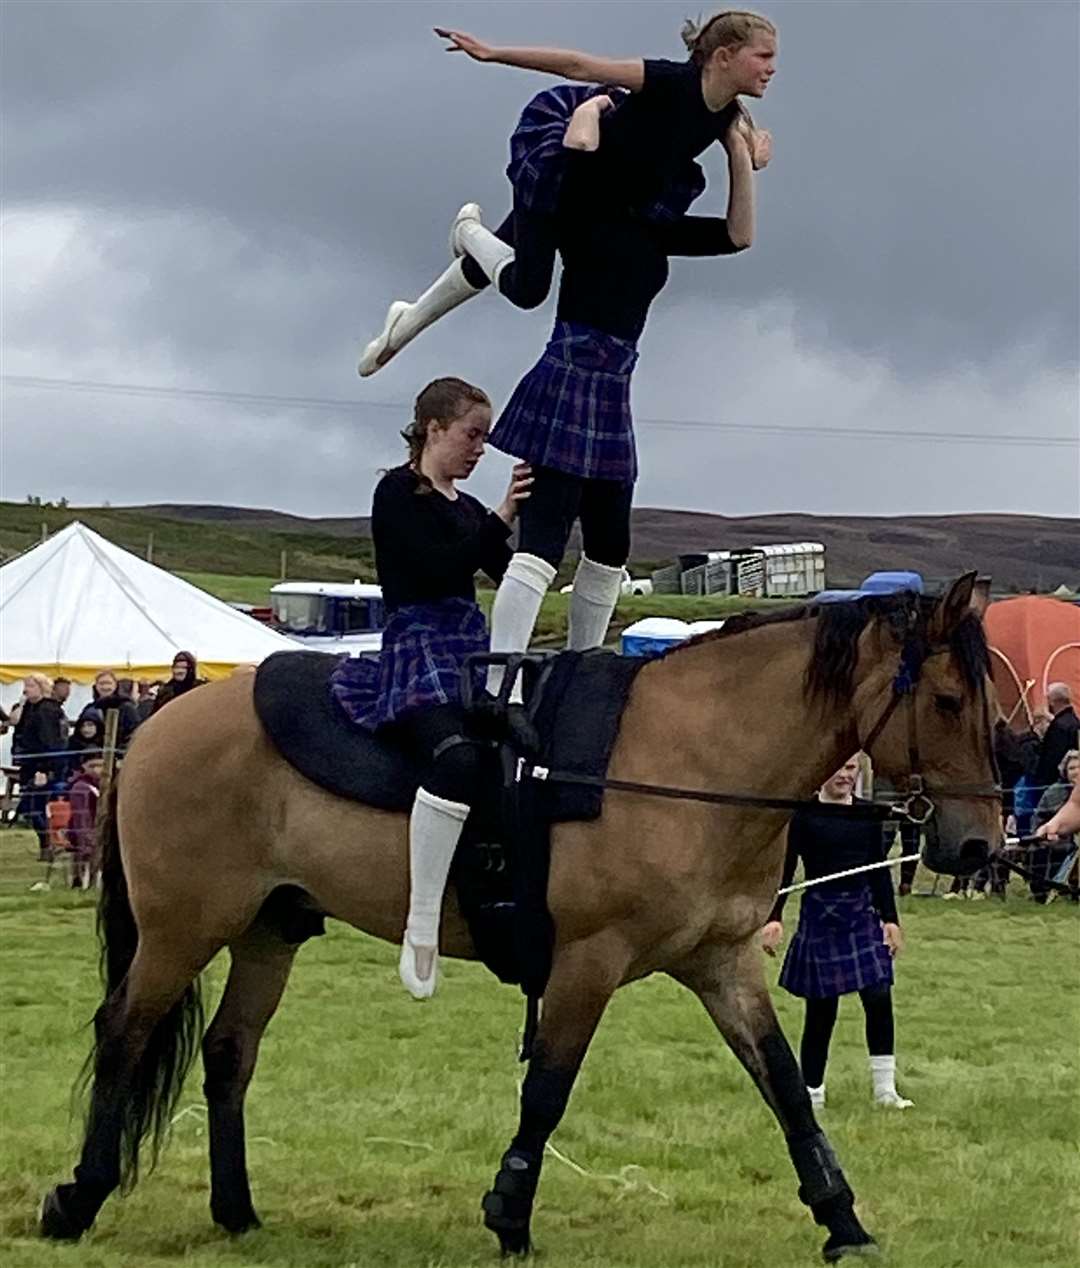 Riders of the Storm, an equestrian stunt team from Perthshire, wowed the crowd.